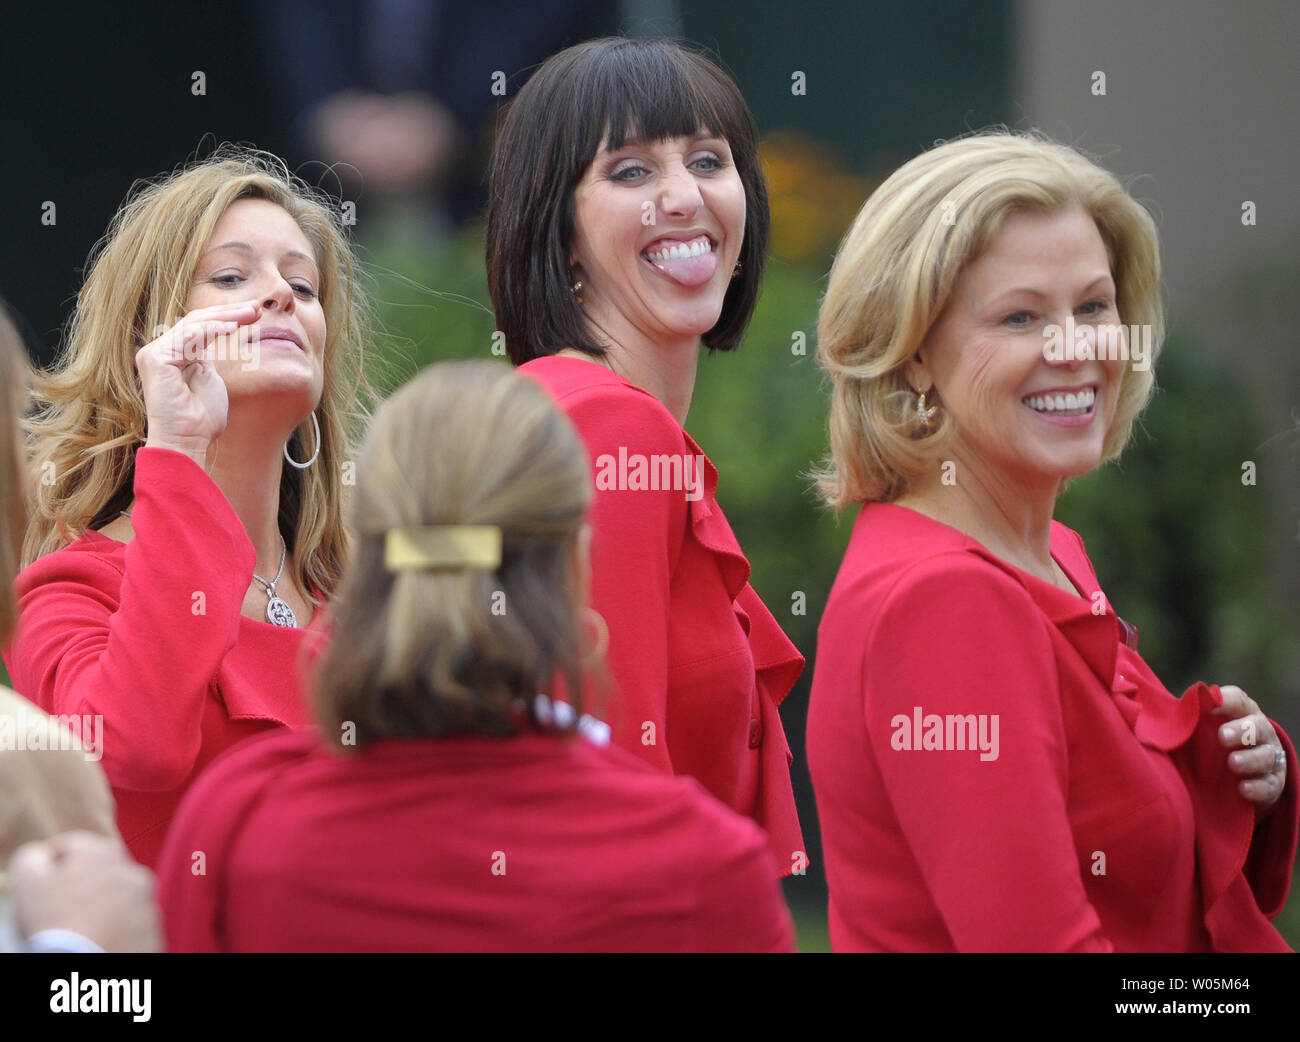 United States team members wives Tabitha Furyk (L), Lisa Cink (C) and Janice Haas attend the opening ceremony of The Presidents Cup at Harding Park Golf Course in San Francisco, California on October 7, 2009. Seated behind Bush are members of the United States team.   UPI/Kevin Dietsch Stock Photo